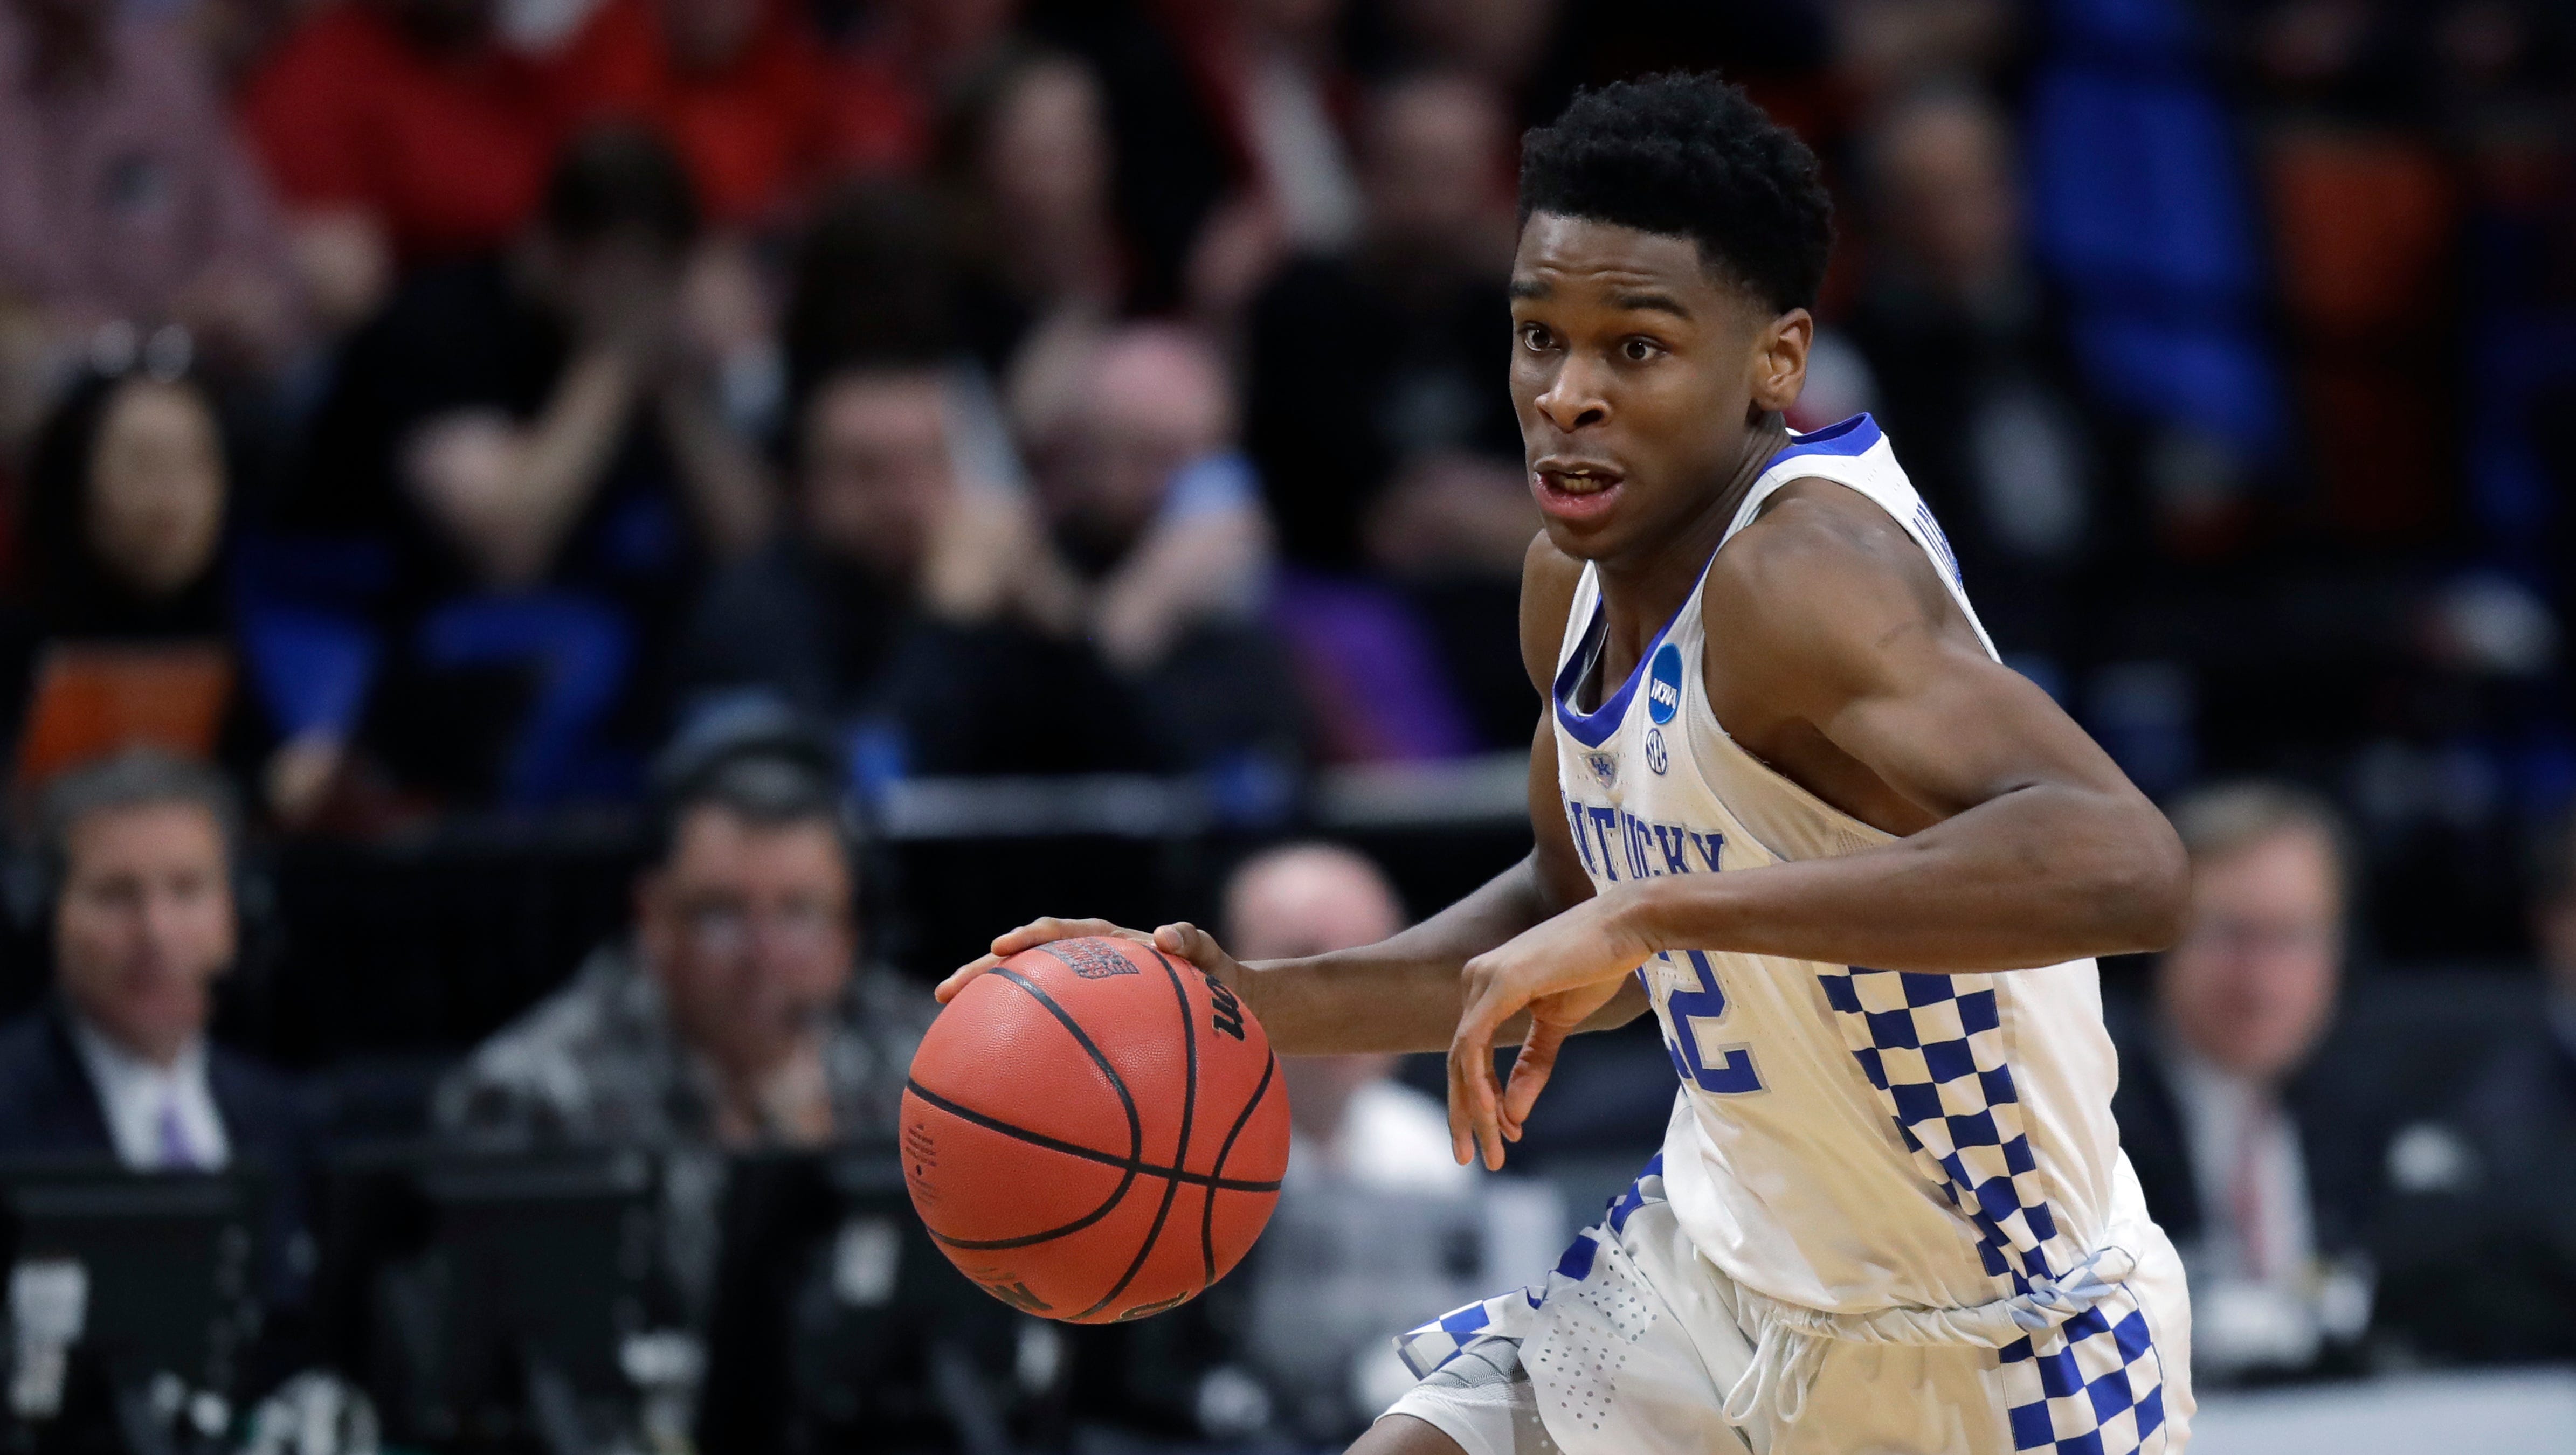 13. Los Angeles Clippers: Shai Gilgeous-Alexander, PG, Fr., Kentucky. He would have looked good as a potential Pistons target, but with the Clippers' back-to-back picks, they add some backcourt depth. Plenty of teams in the top 11 covet Gilgeous-Alexander also, so trades or a surprise move could come as well. At 6-6, he has very good size and could develop into a nice combo option.